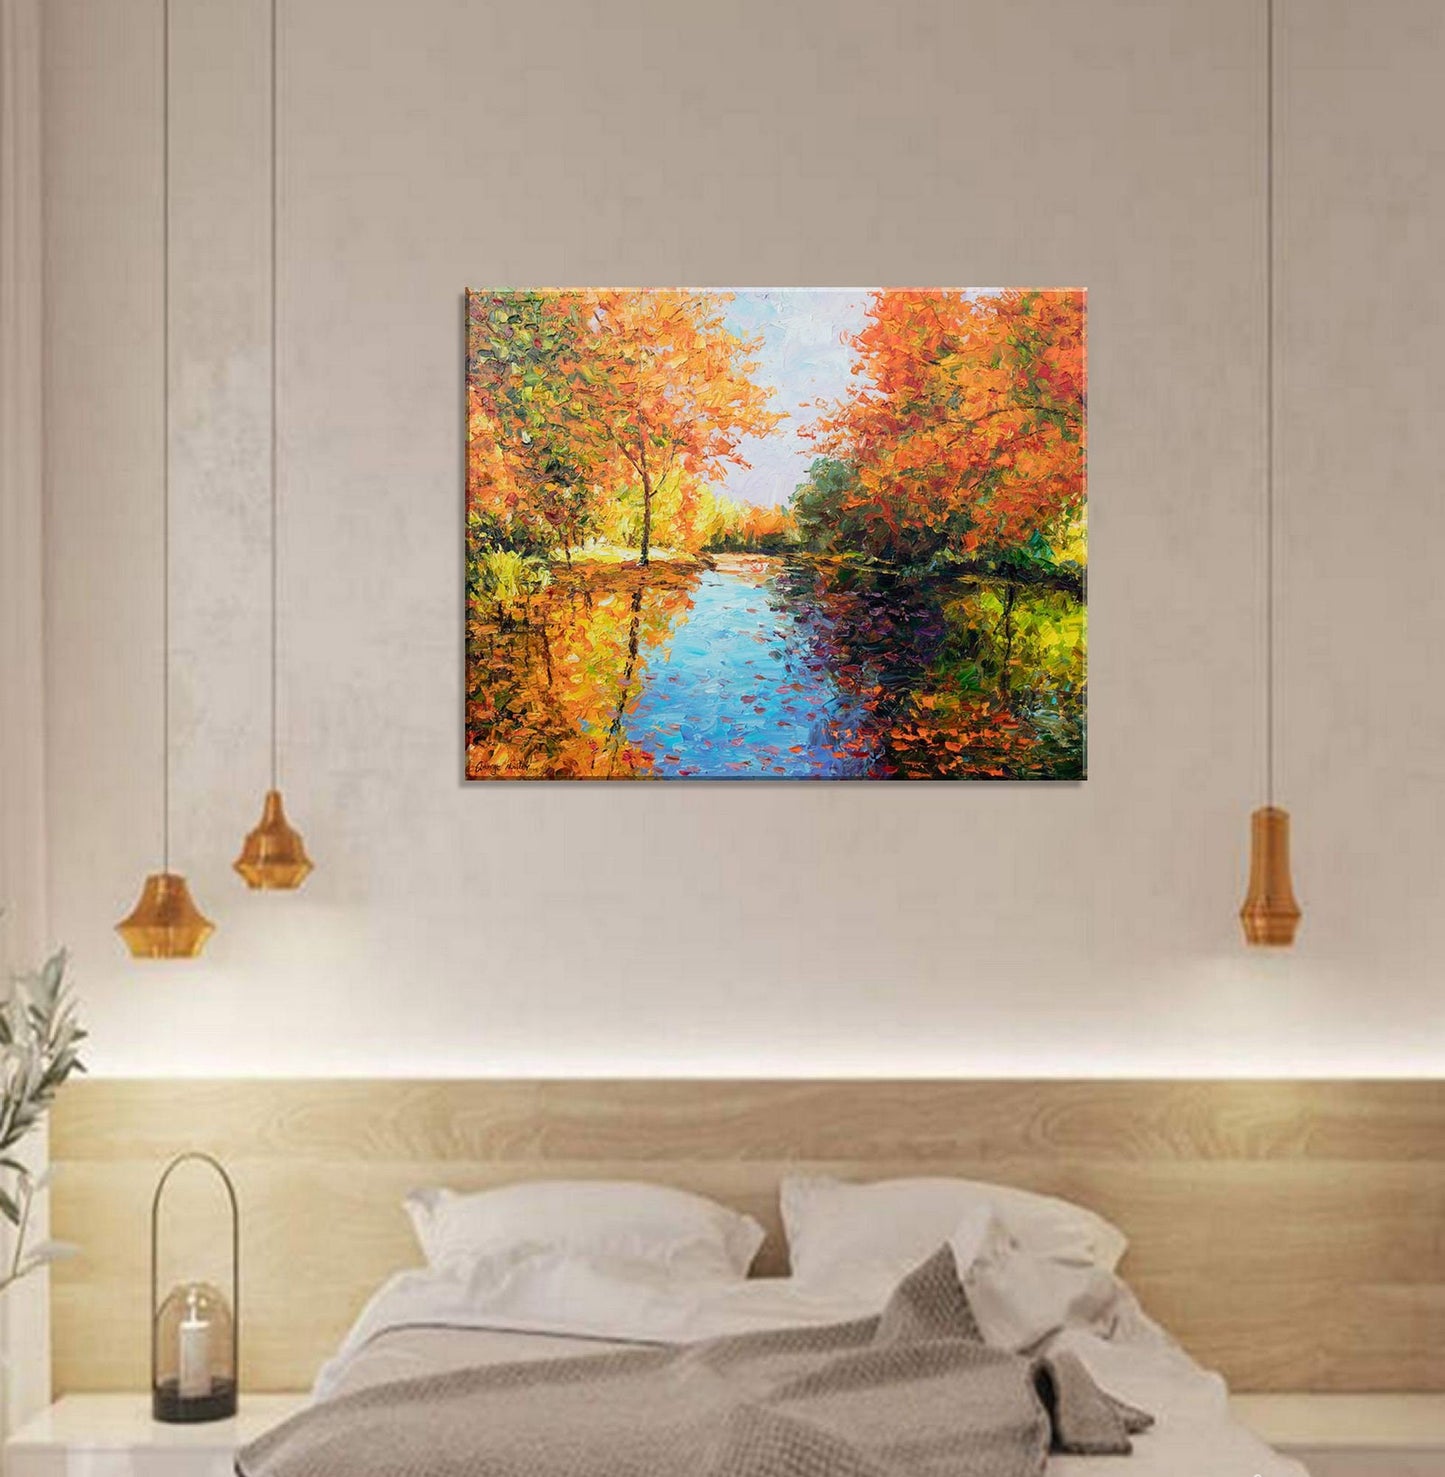 Landscape Painting, Abstract Oil Painting, Canvas Painting, Large Wall Decor, Original Painting, Large Abstract Painting, Autumn Forest Art